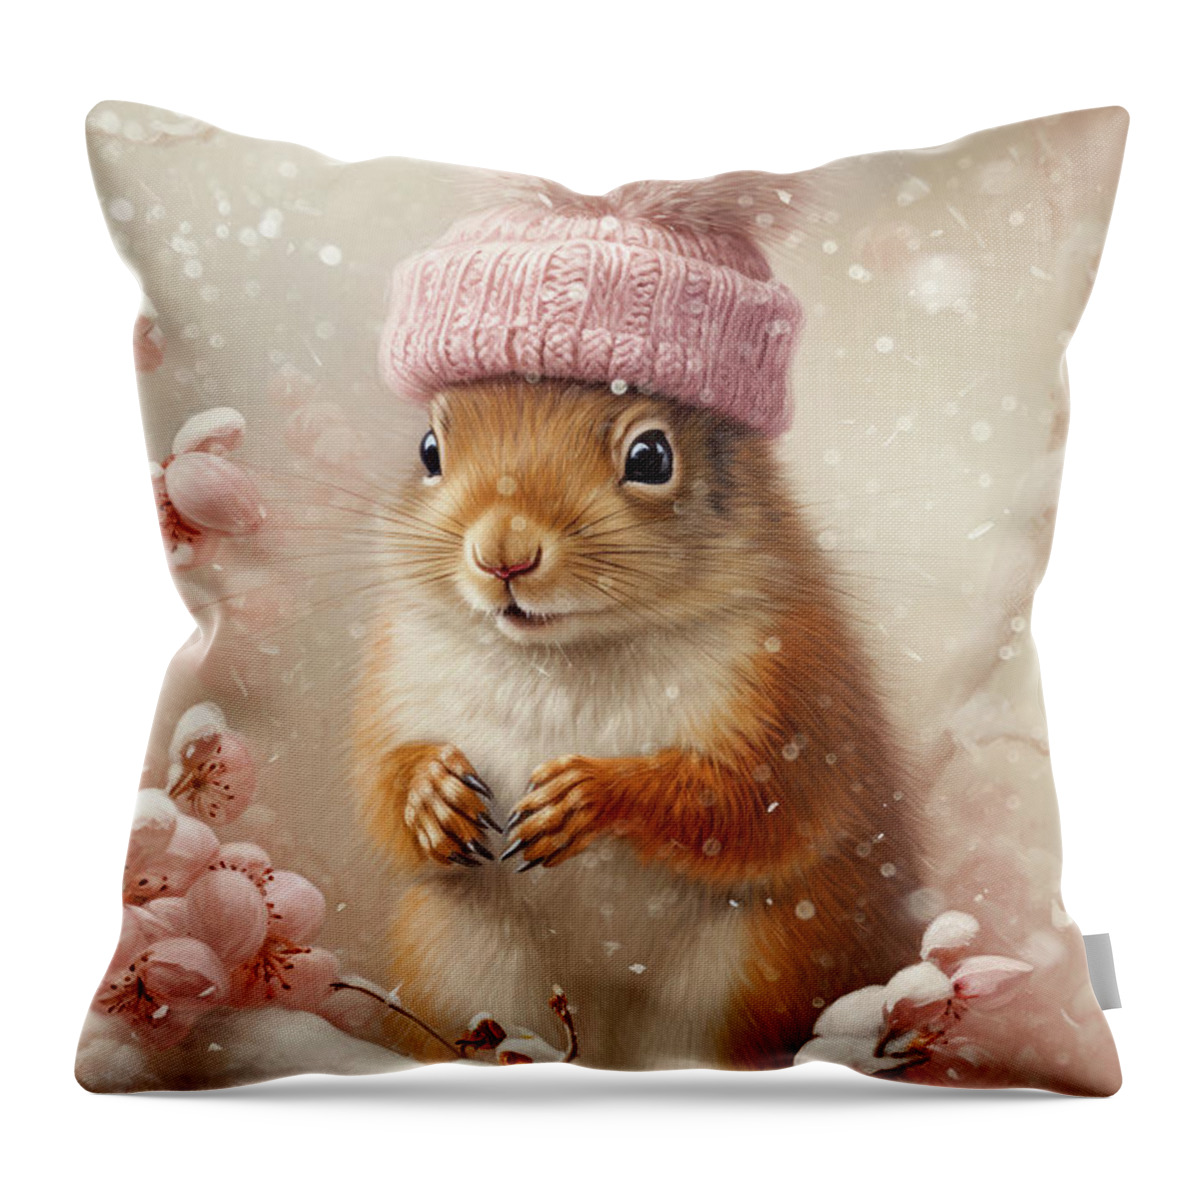 Squirrel Throw Pillow featuring the digital art Little Nibbles by Tina LeCour